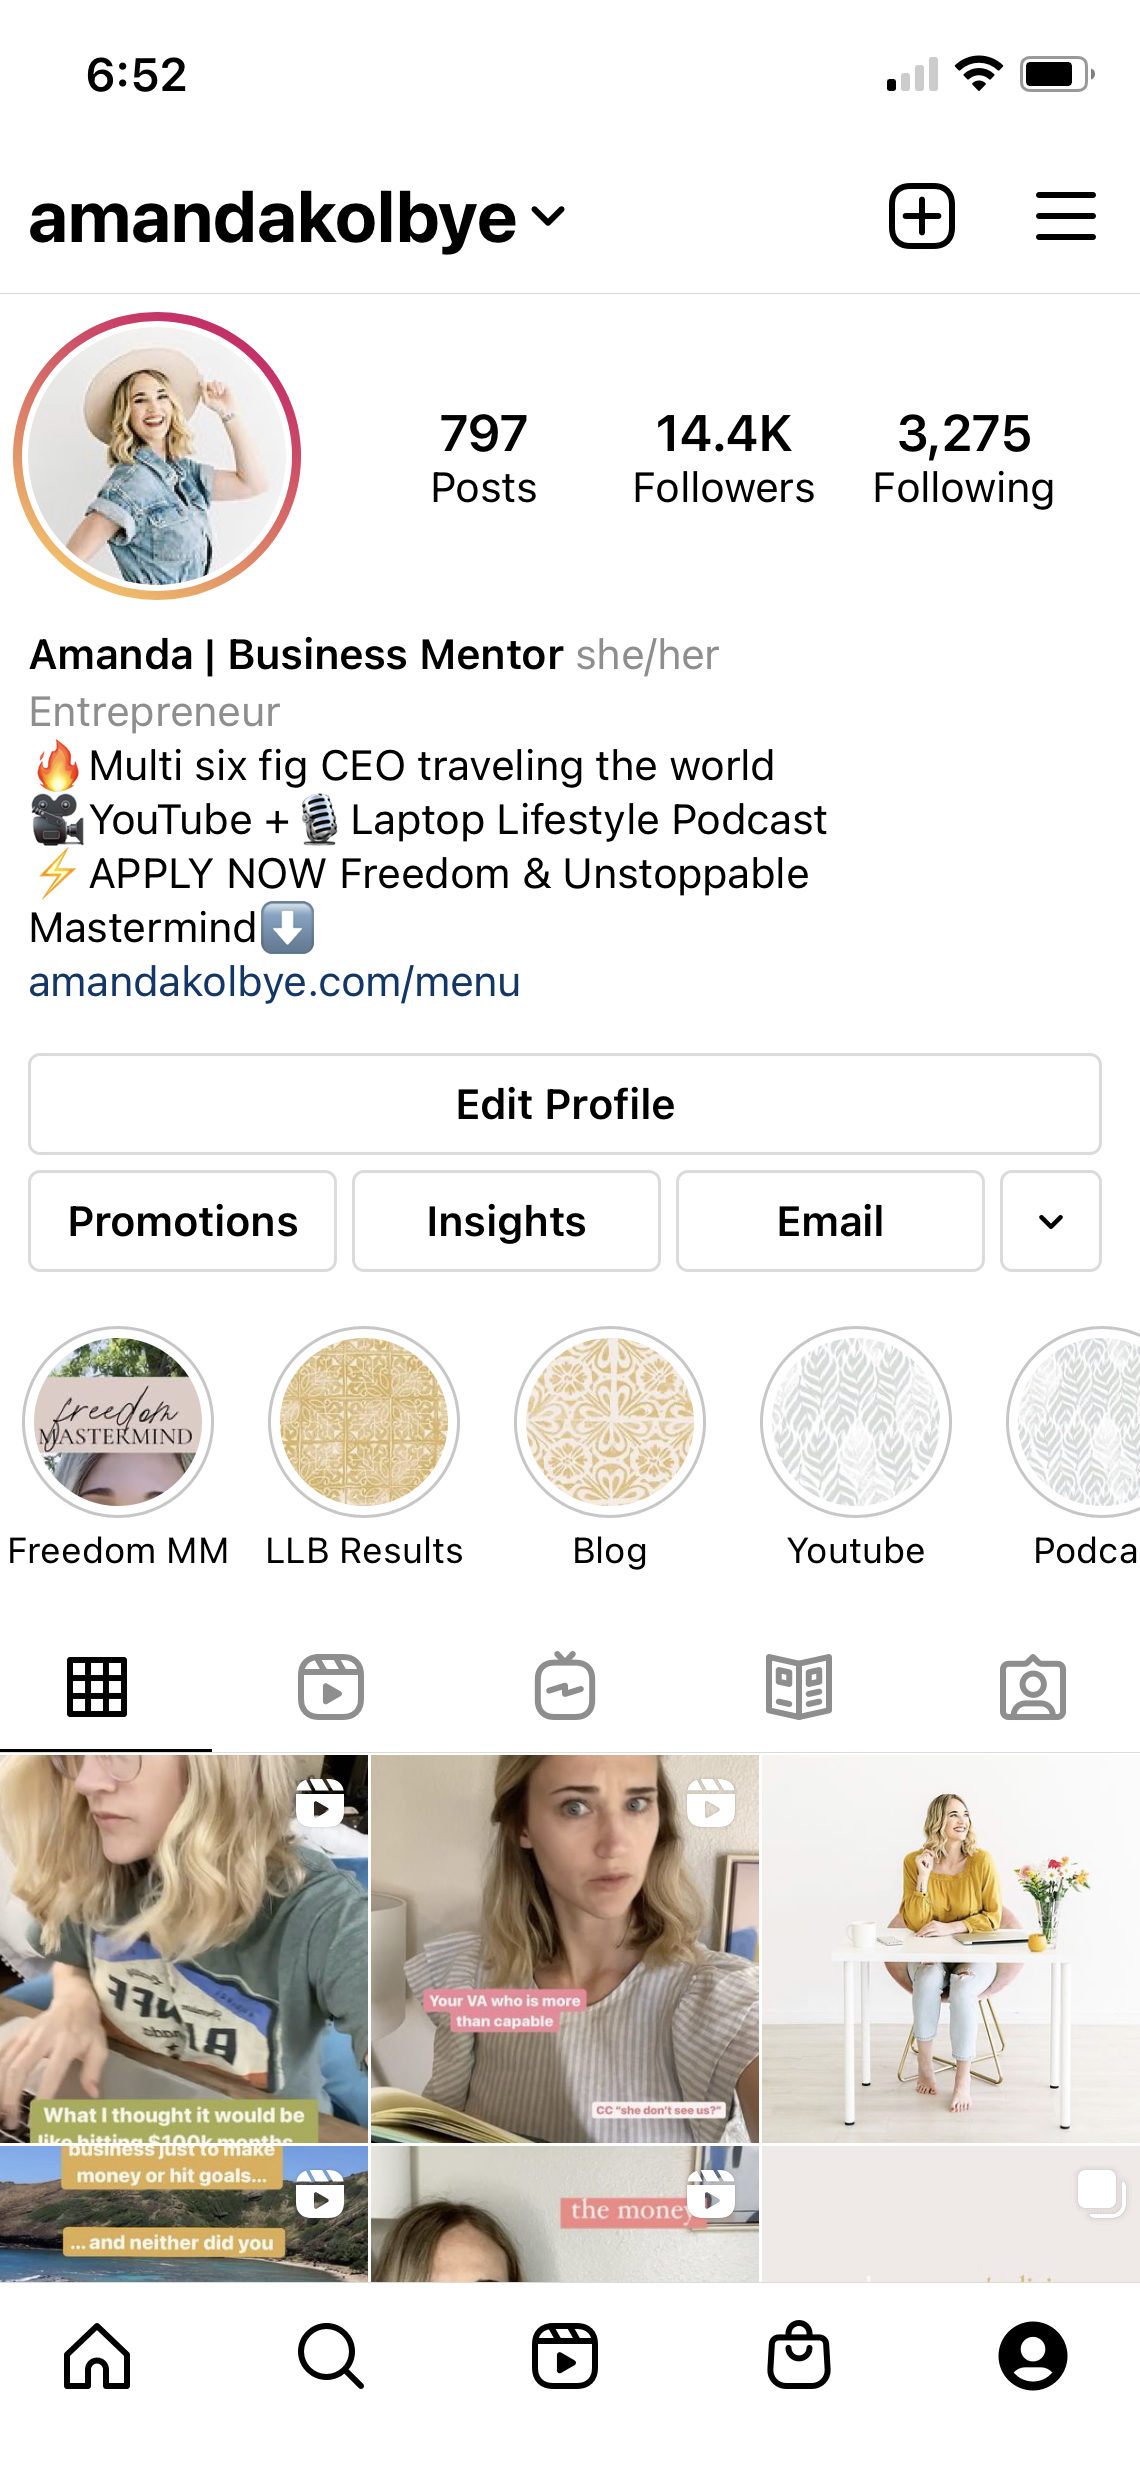 my profile and bio are an integral part of the instagram sales funnel